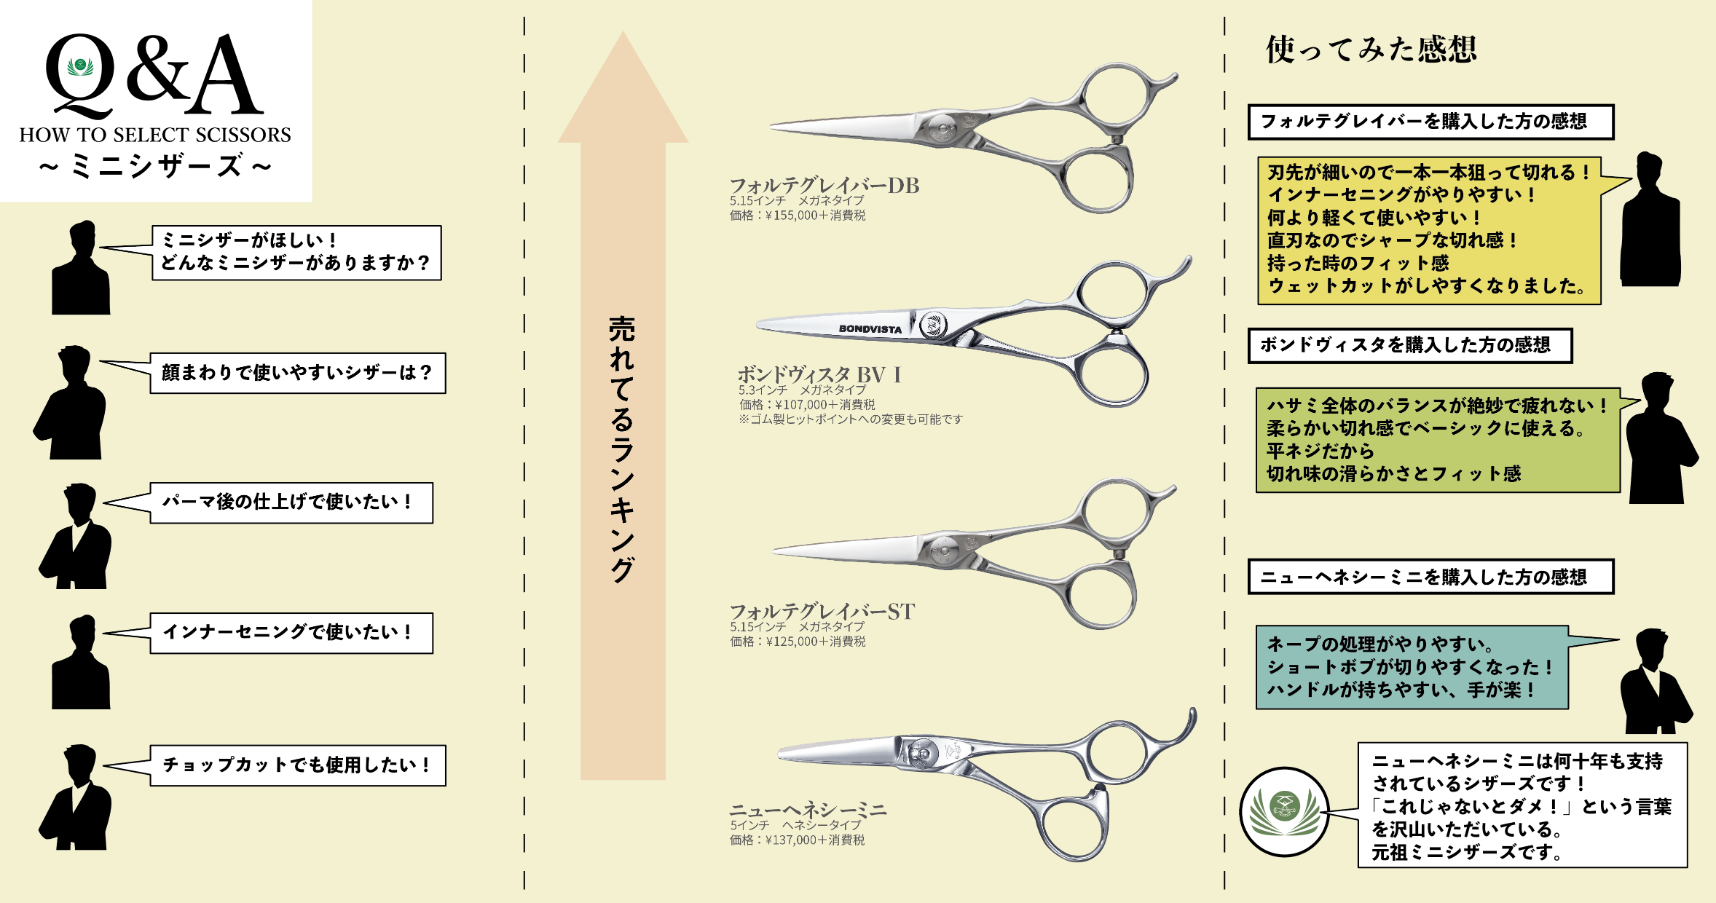 Q&A~How to select scissors~「ミニシザーズ」 | カットシザーズ